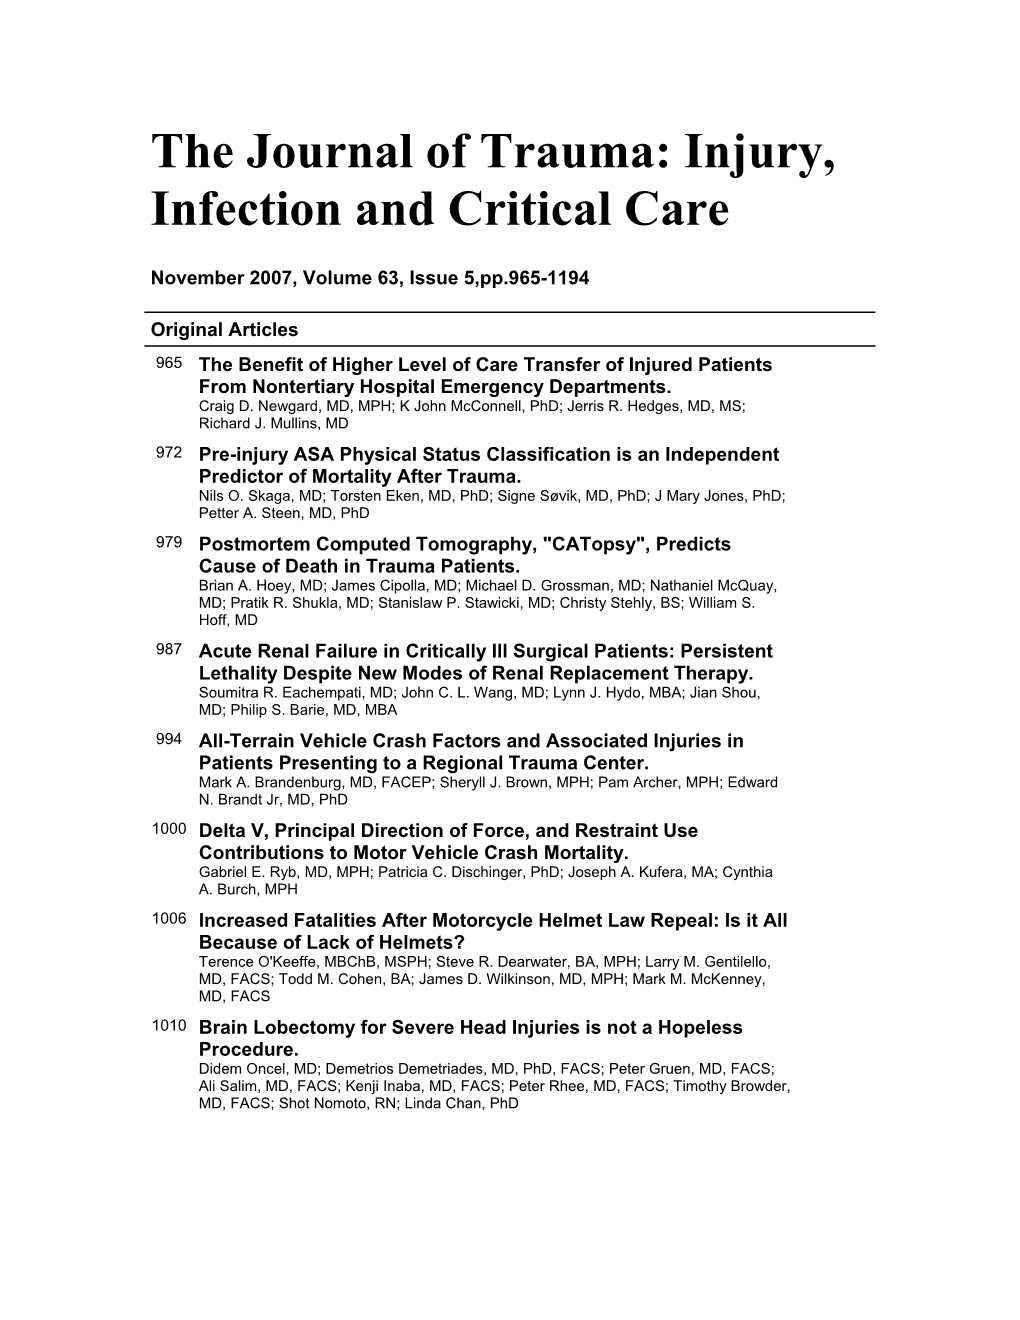 The Journal of Trauma: Injury, Infection and Critical Care